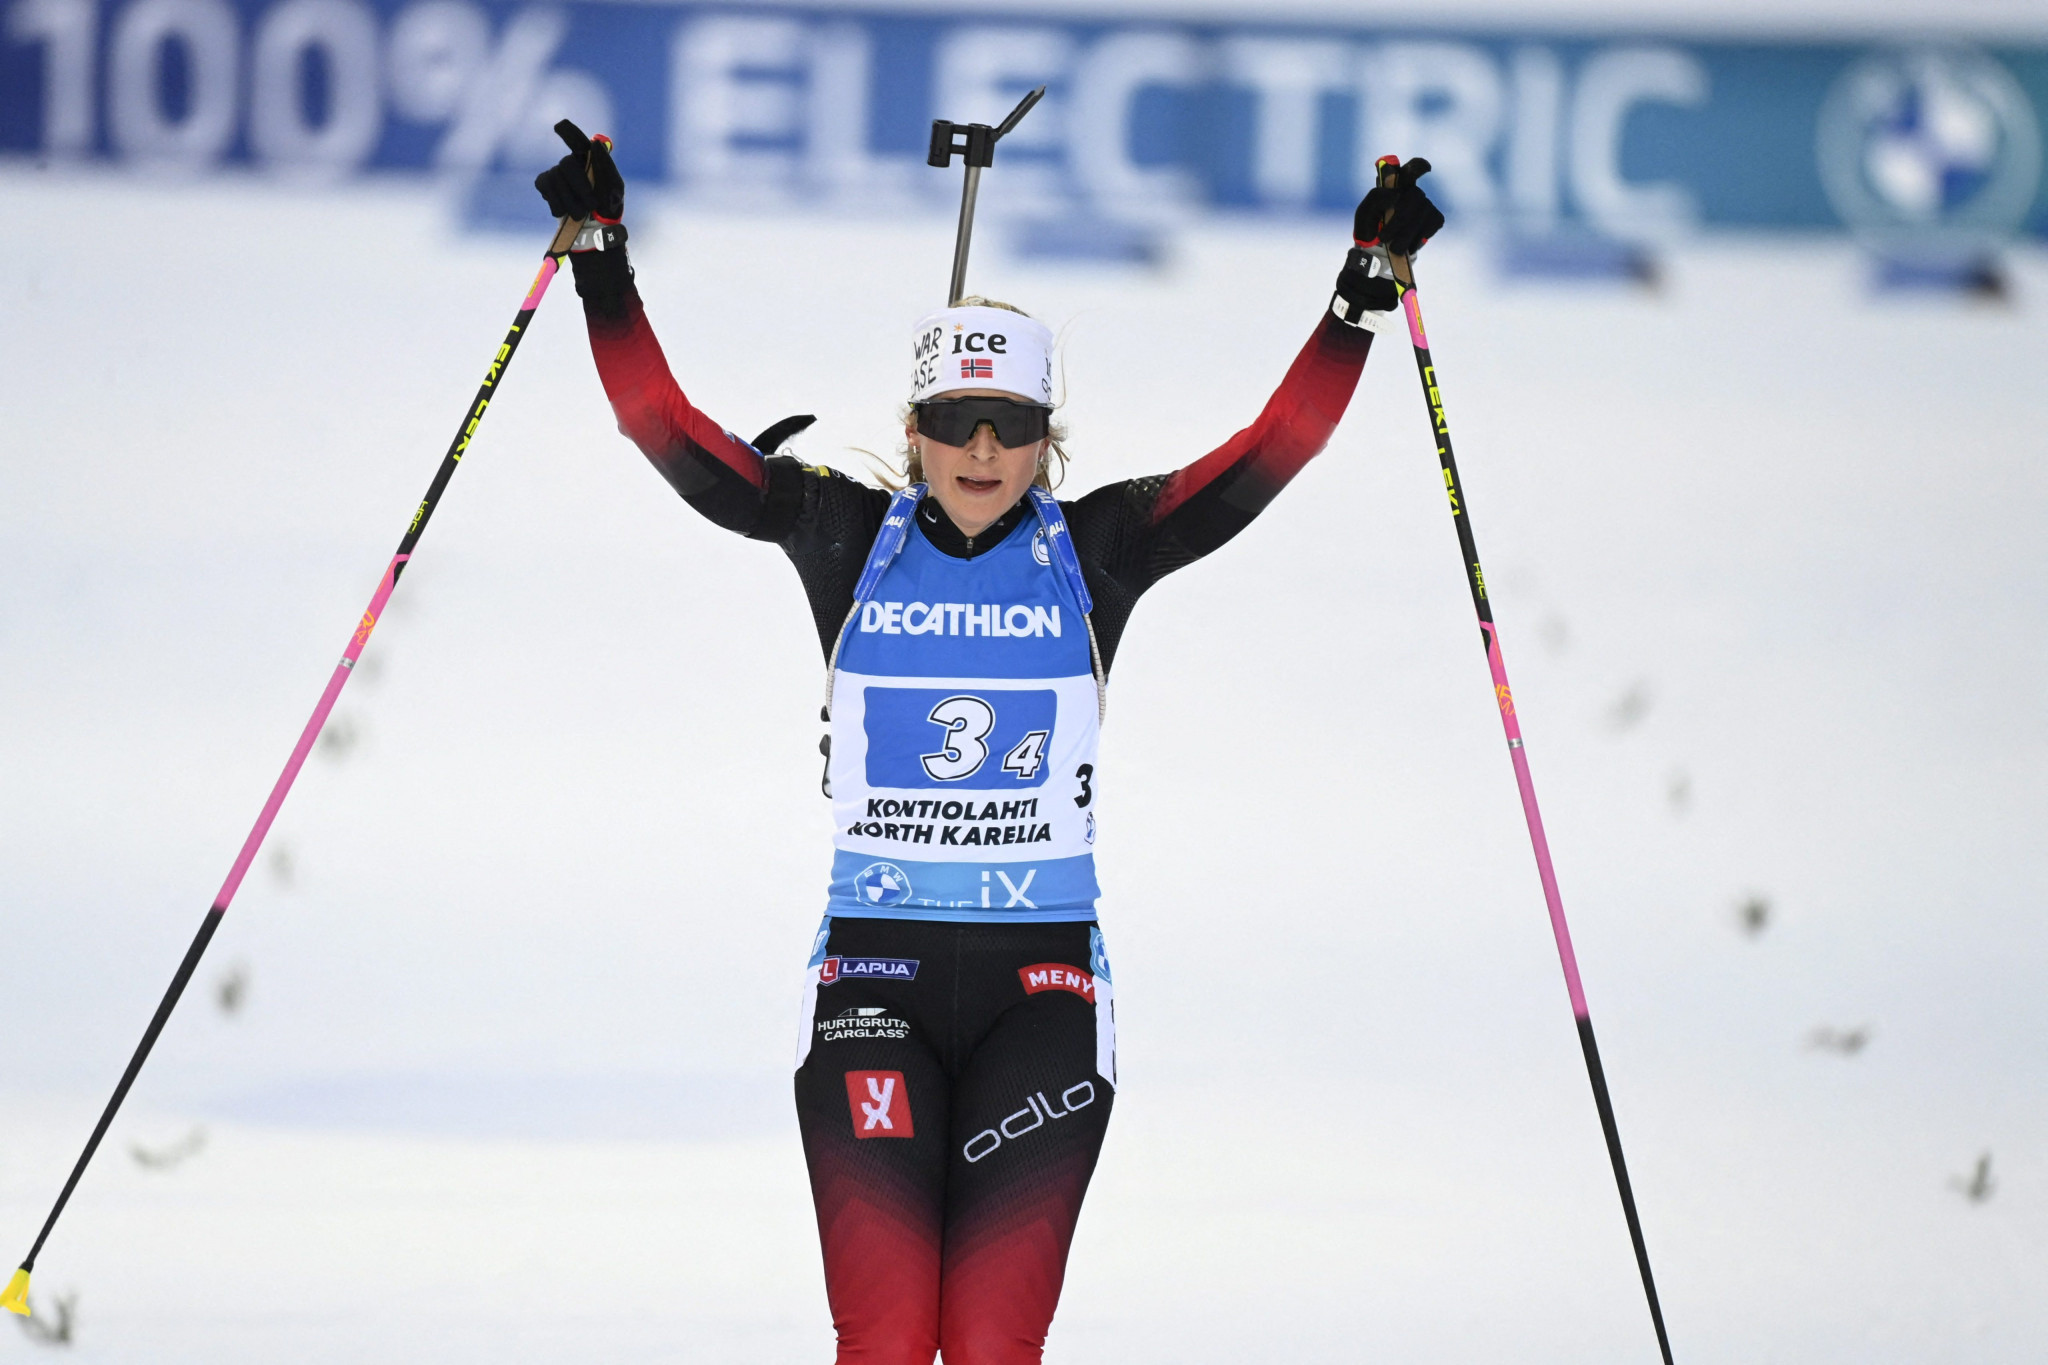 Norway were victorious in the women's 4x6km relay in Finland ©Getty Images